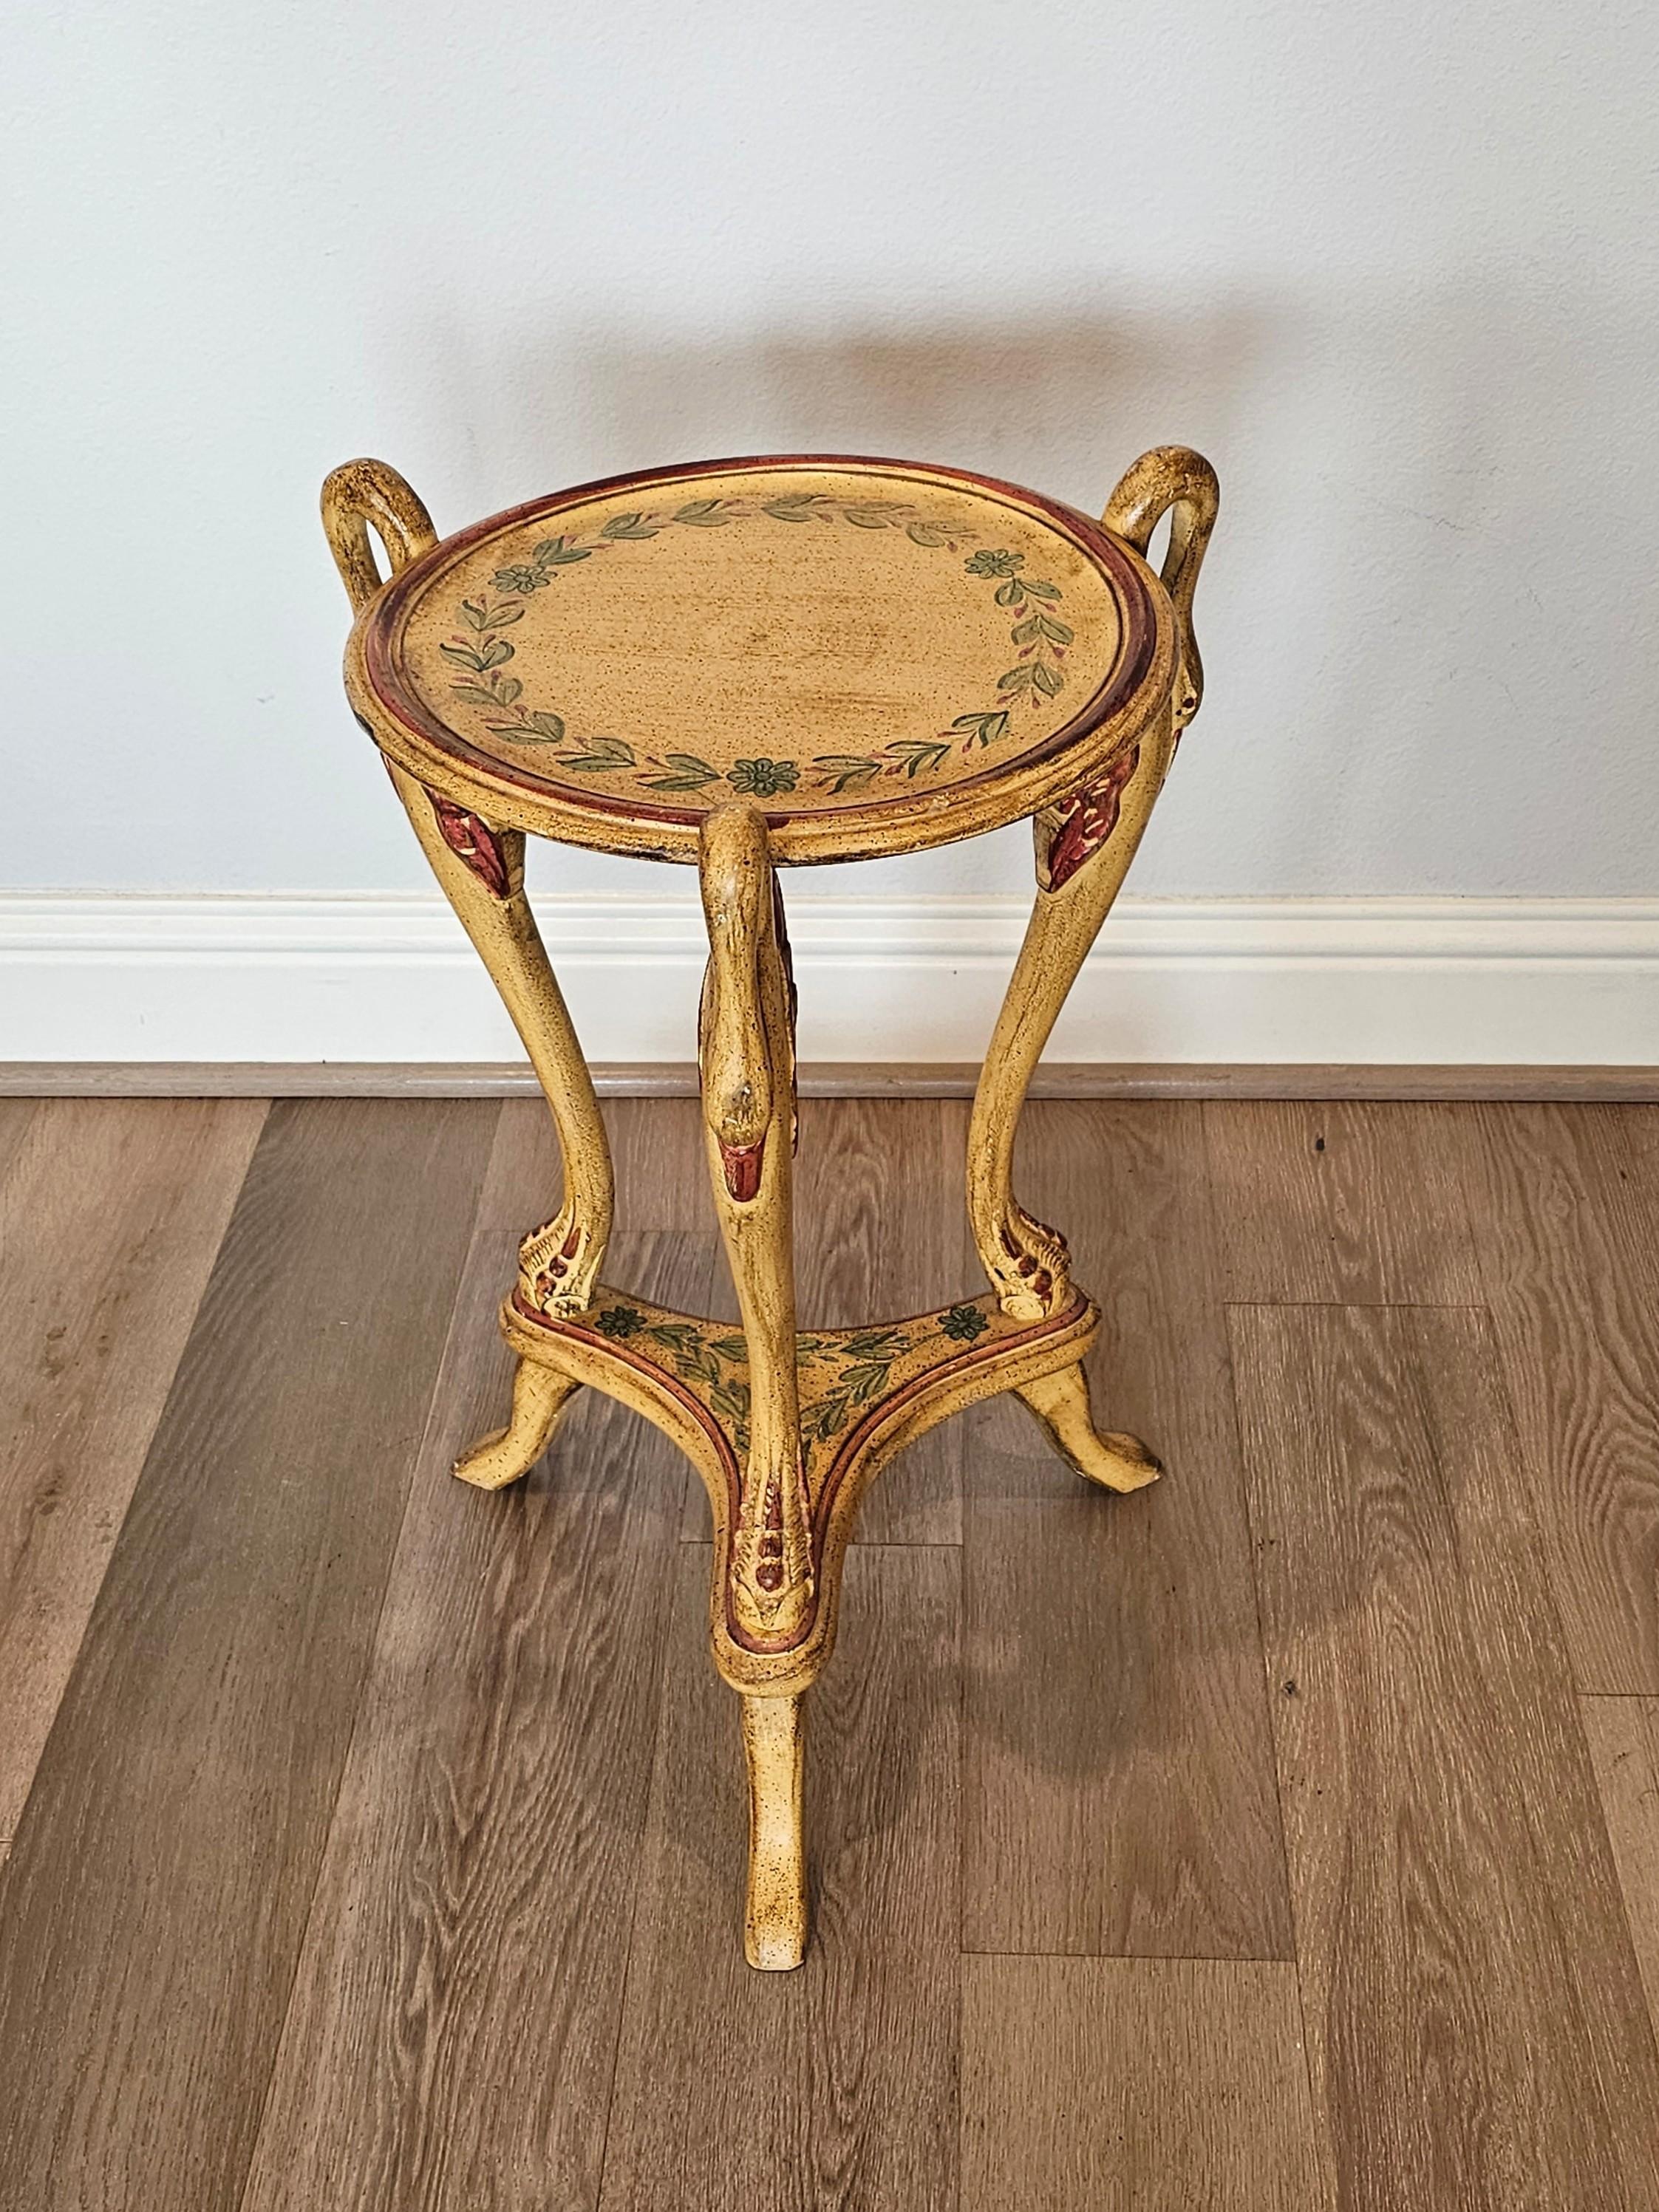 Vintage Neoclassical Revival Painted Swan Guéridon Table For Sale 11